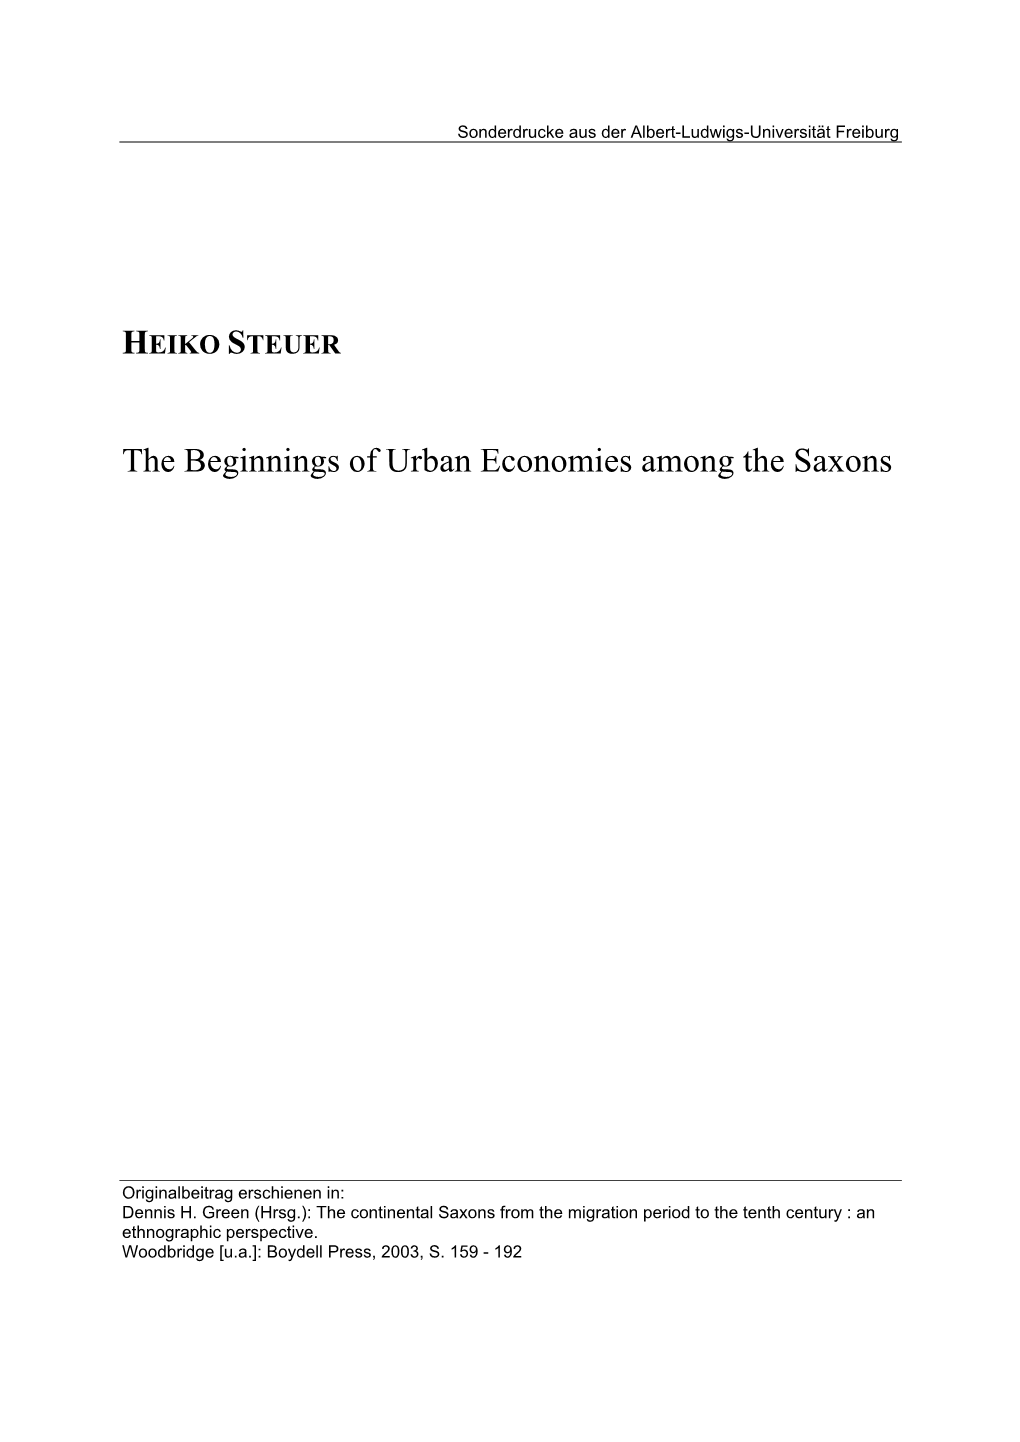 The Beginnings of Urban Economies Among the Saxons